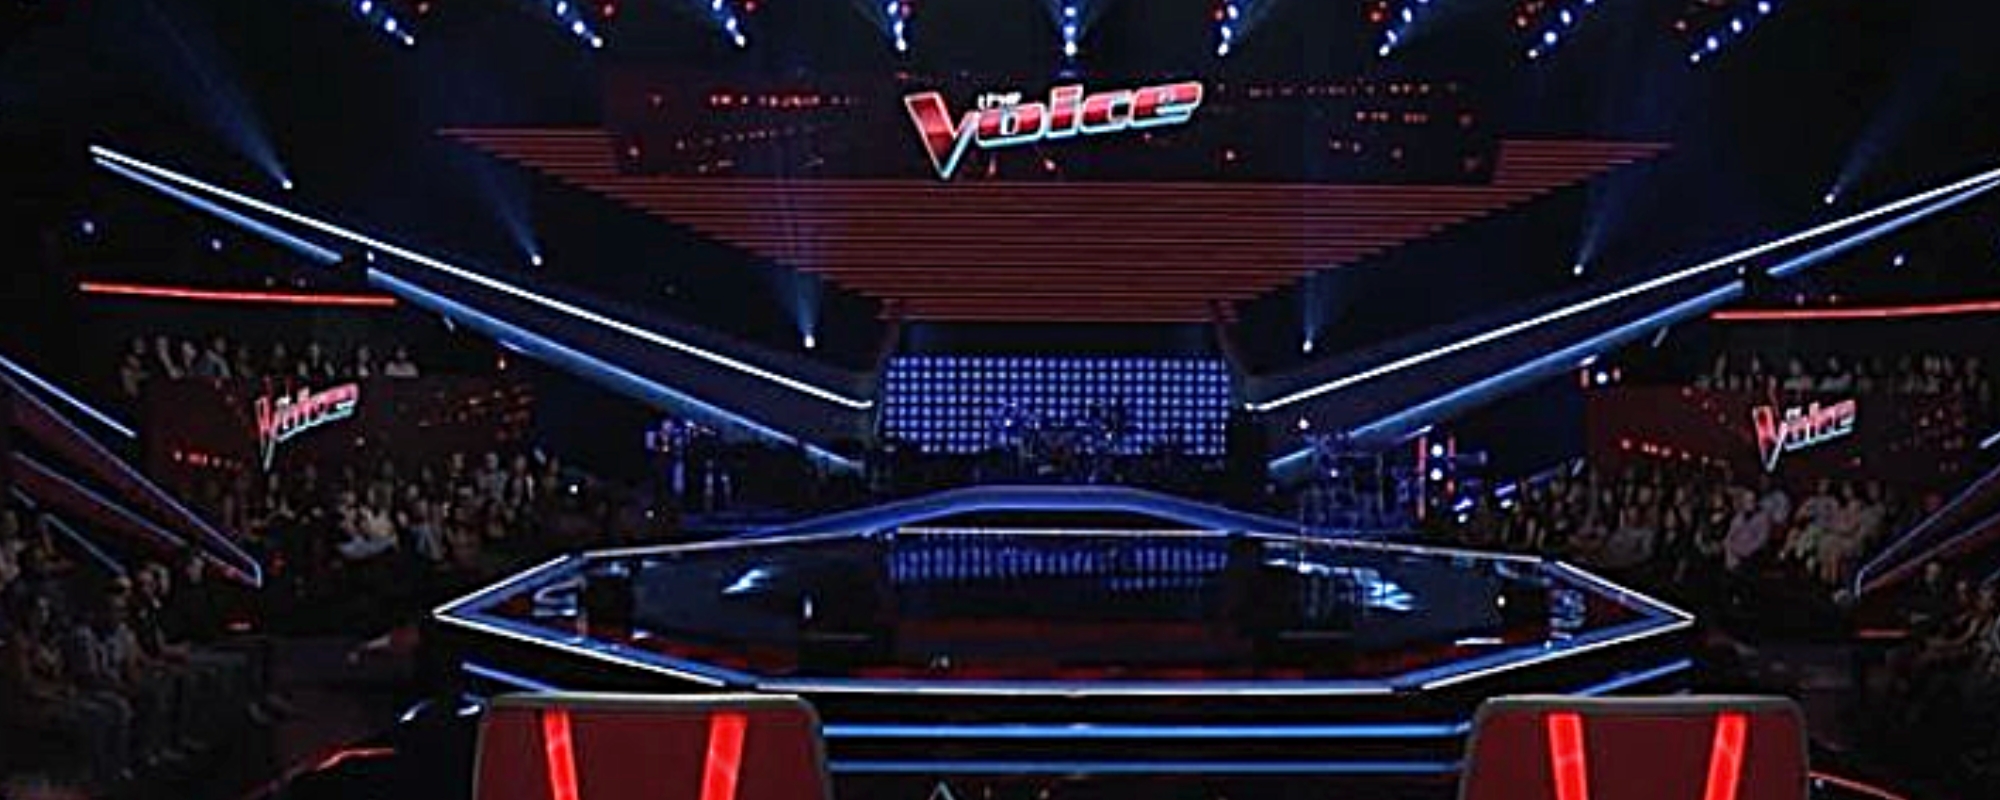 Is There a New Episode of ‘The Voice’ Tonight? Watch Season 24 Playoffs on NBC